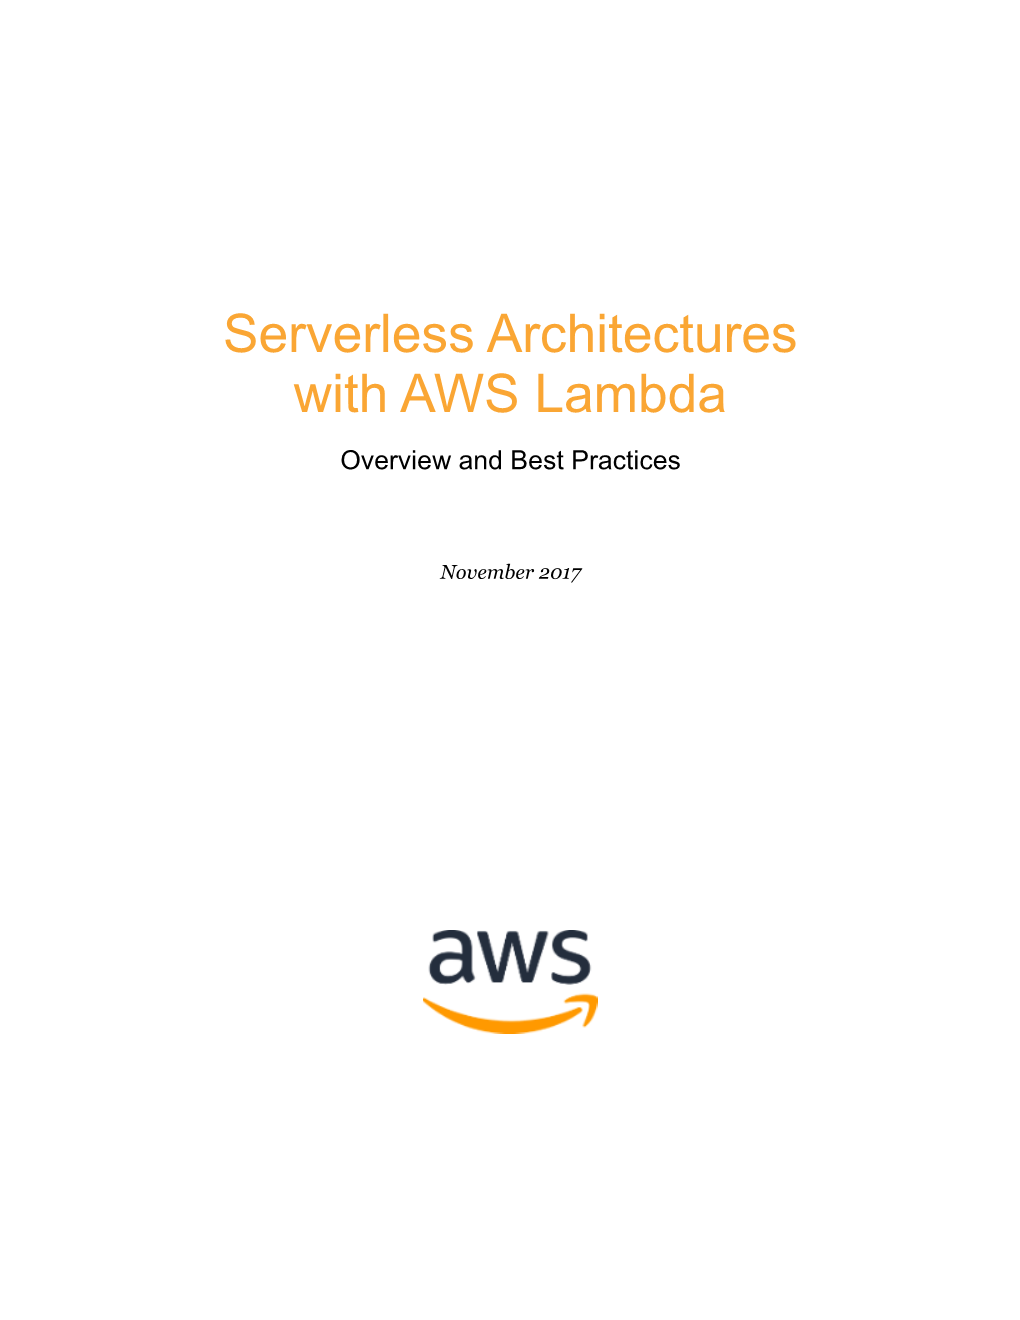 Serverless Architectures with AWS Lambda Overview and Best Practices